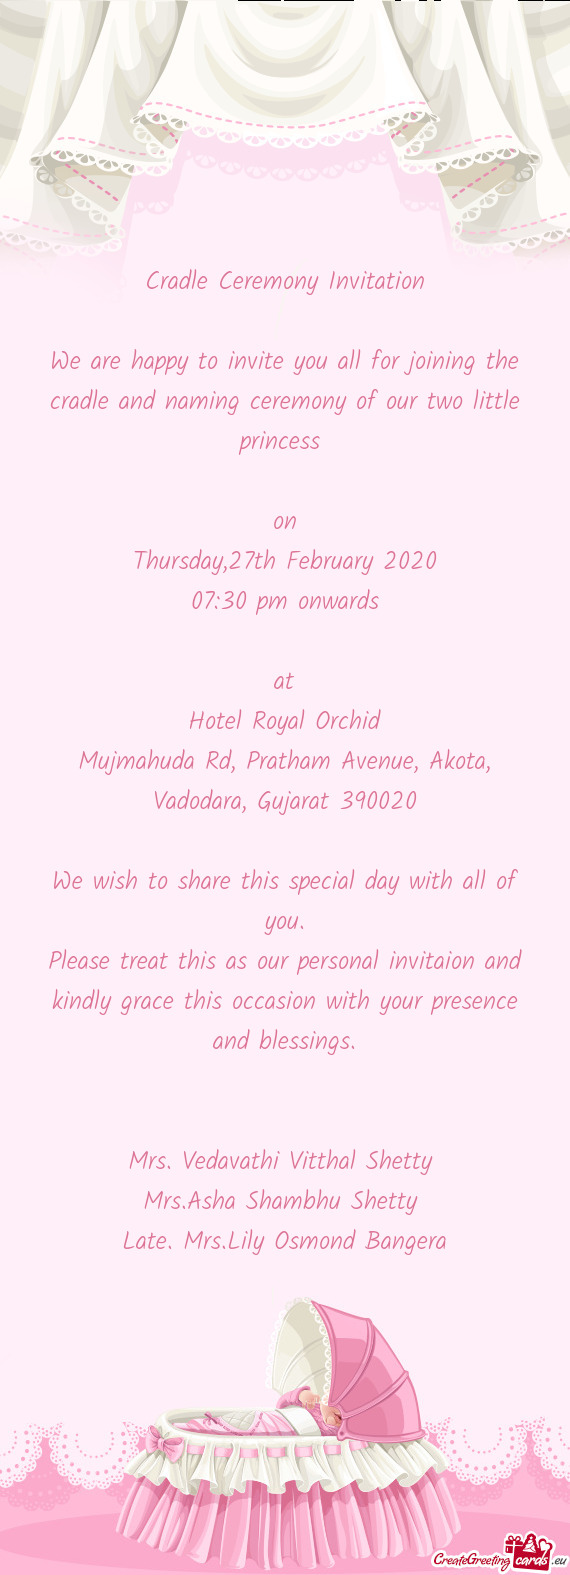 We are happy to invite you all for joining the cradle and naming ceremony of our two little princess